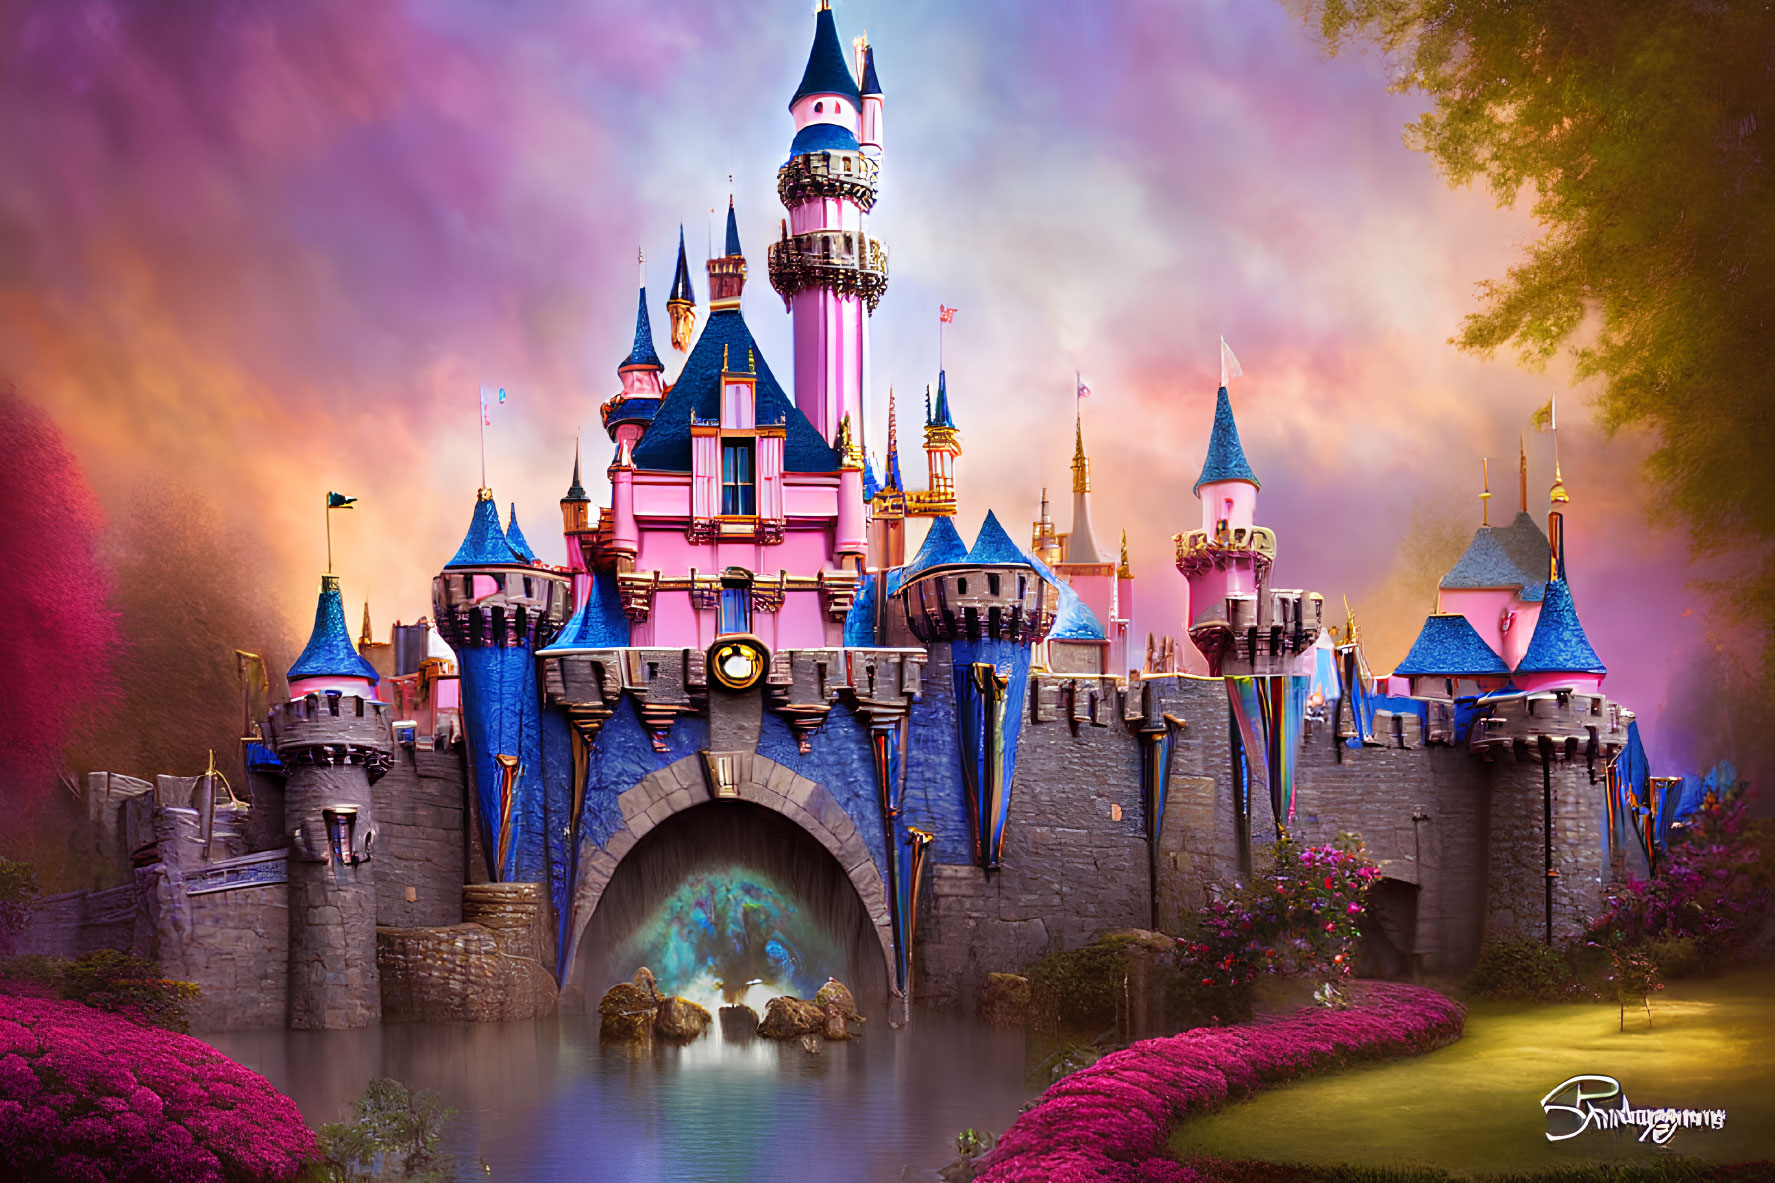 Fantasy castle with pink and blue towers under pink sky